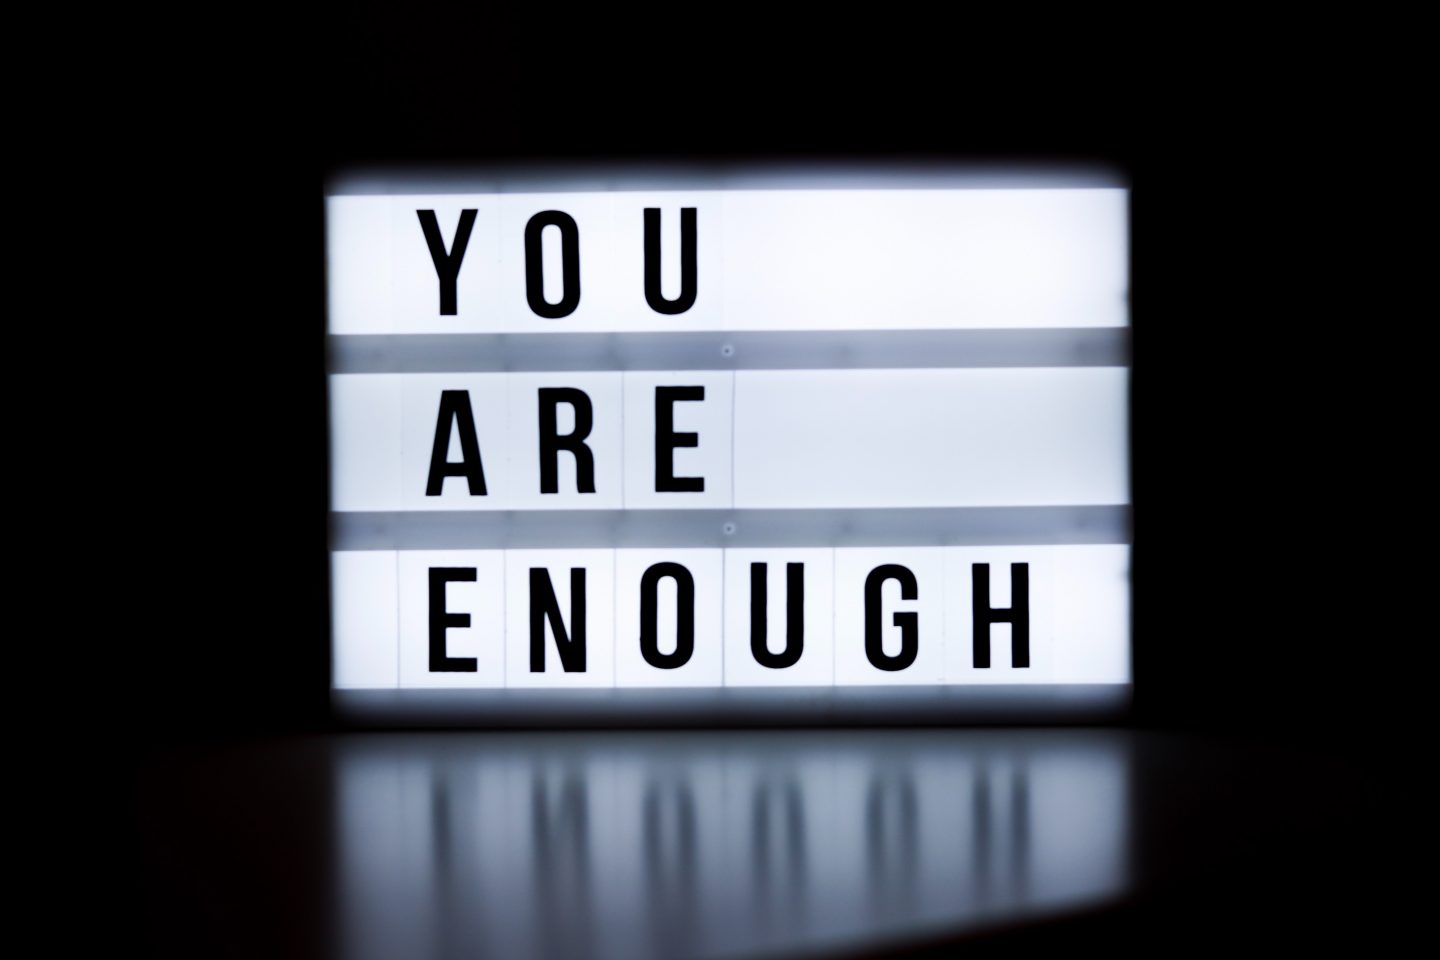 God says you are enough. It is his utmost thoughts towards you. You are a treasure that is thought of by God with great admiration and joy.